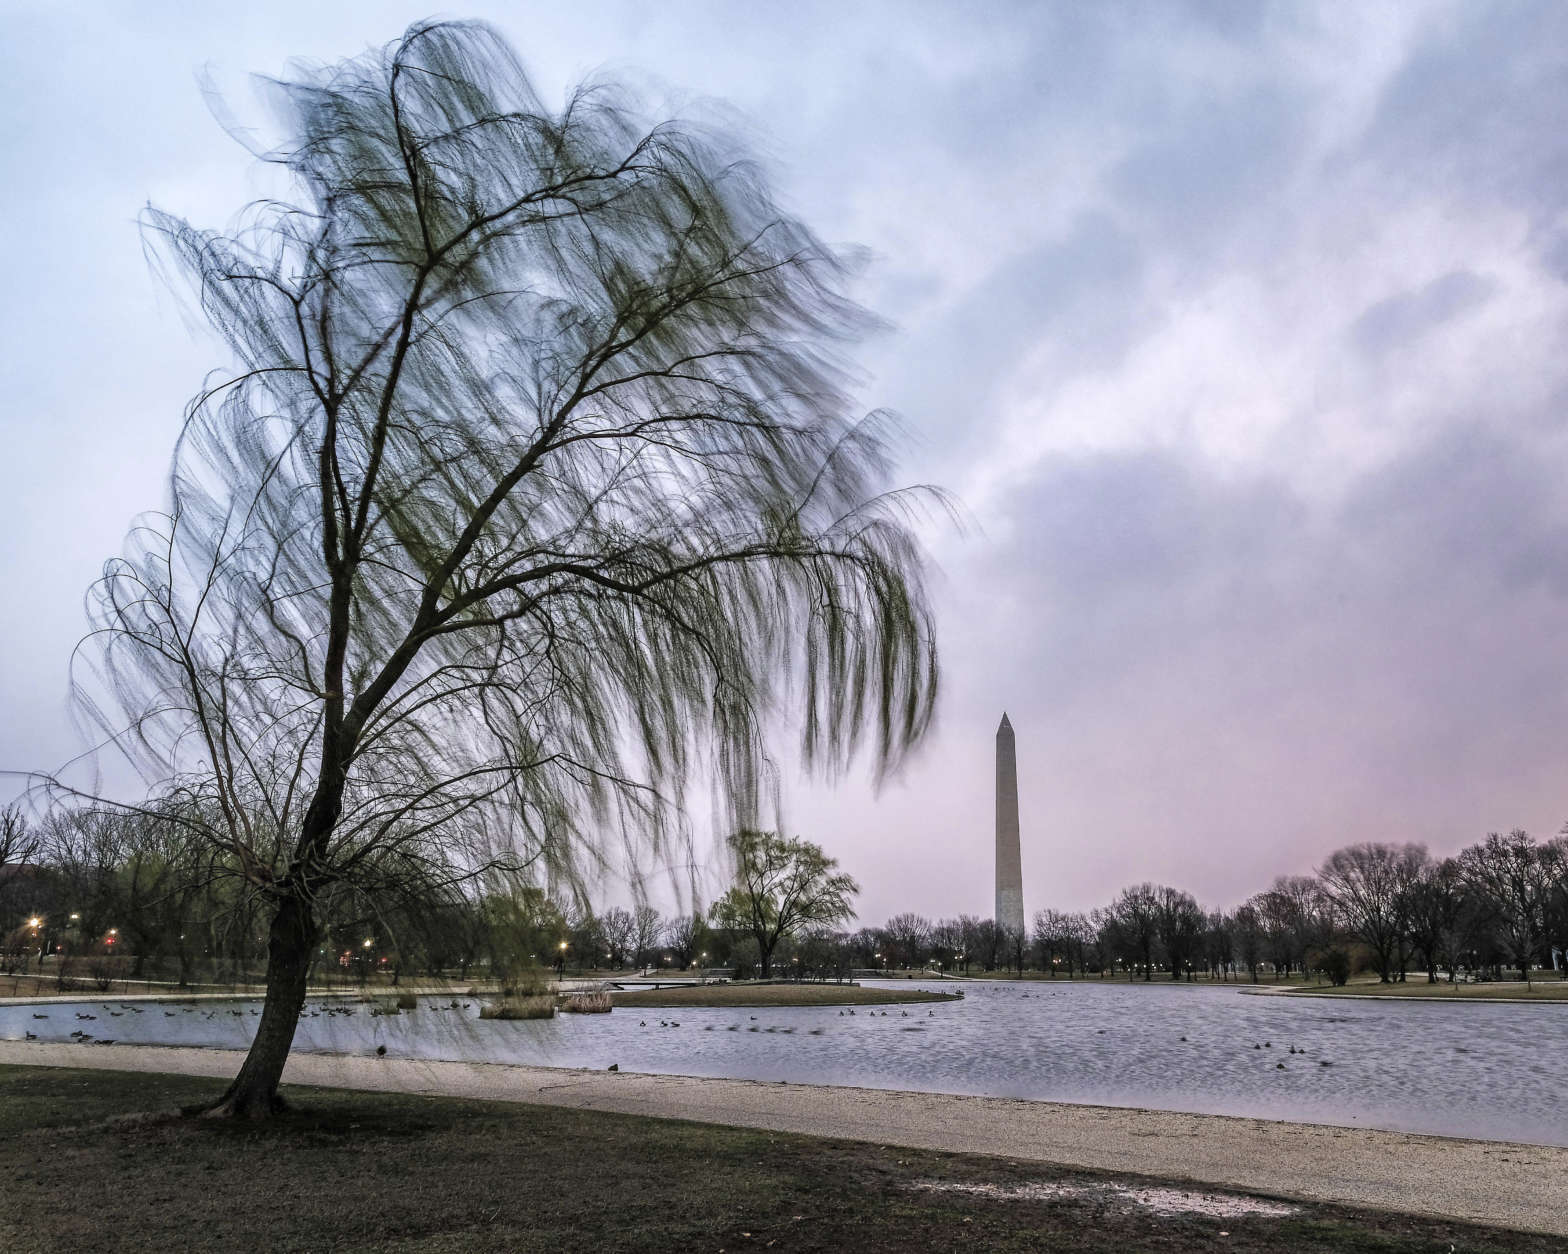 Willow trees surrounding the Constitution Gardens on the National Mall in Washington blow in the wind on a blustery day in the Nation's Capital, Friday, Mar. 2, 2018. (AP Photo/J. David Ake)